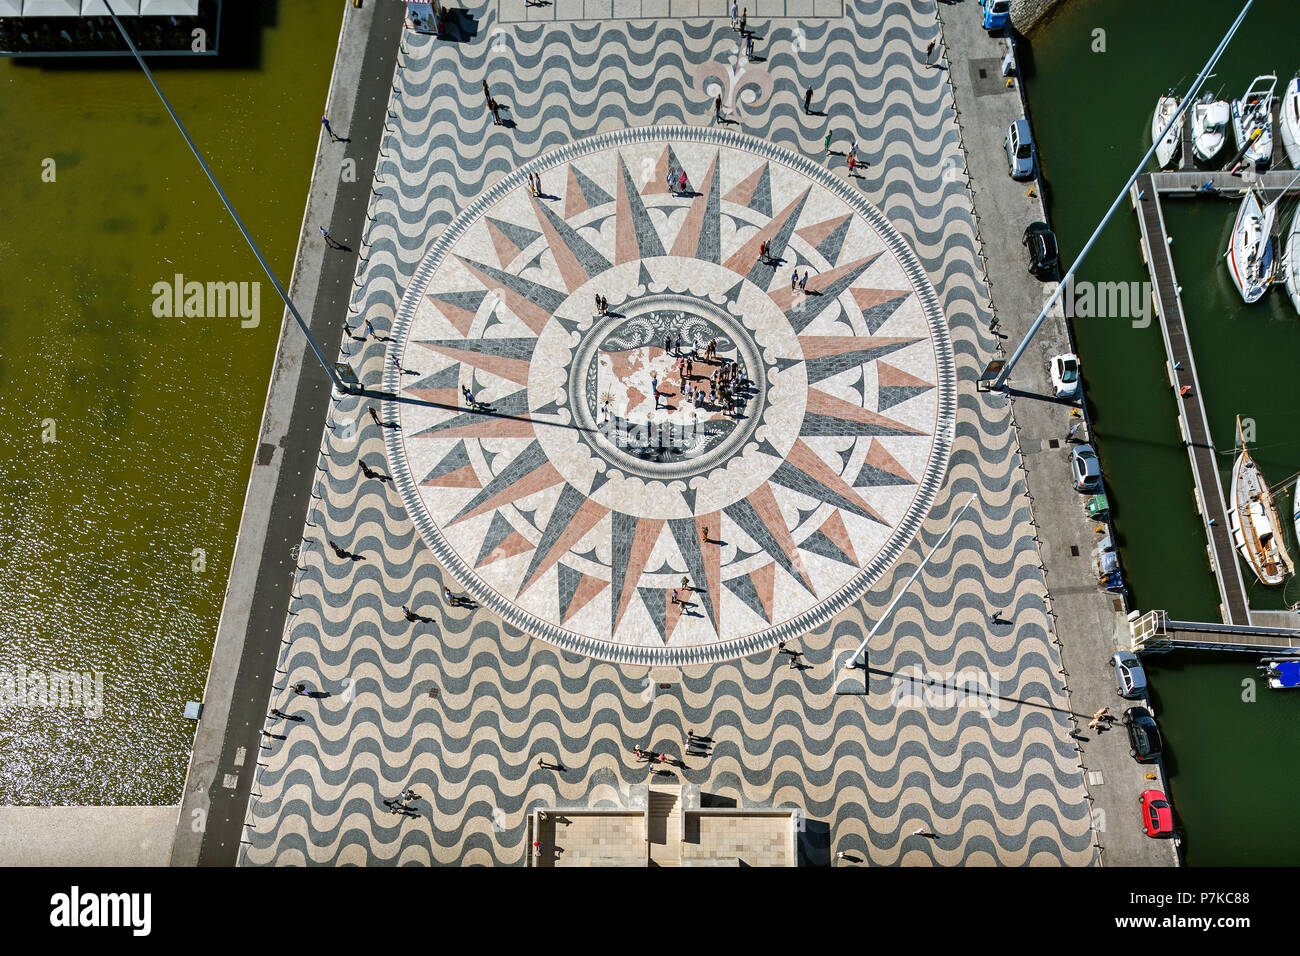 Big compass rose and mappa mundi in the pavement, forecourt of Padrão dos Descobrimentos Monument, Lisbon, Lisbon District, Portugal, Europe Stock Photo